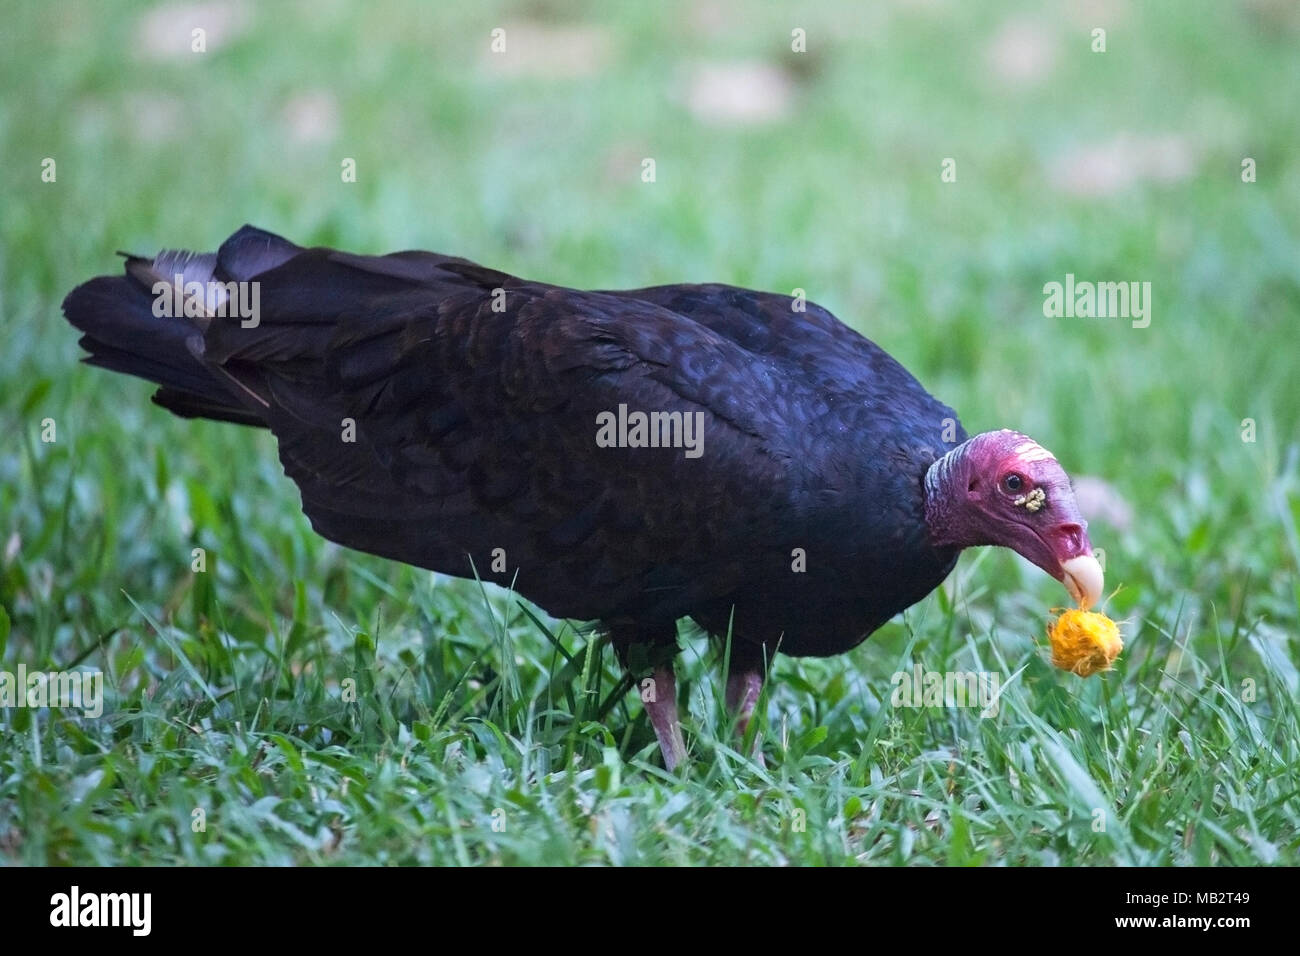 Turkey vulture (Cathartes aura) eating a palm fruit in Costa Rica Stock Photo